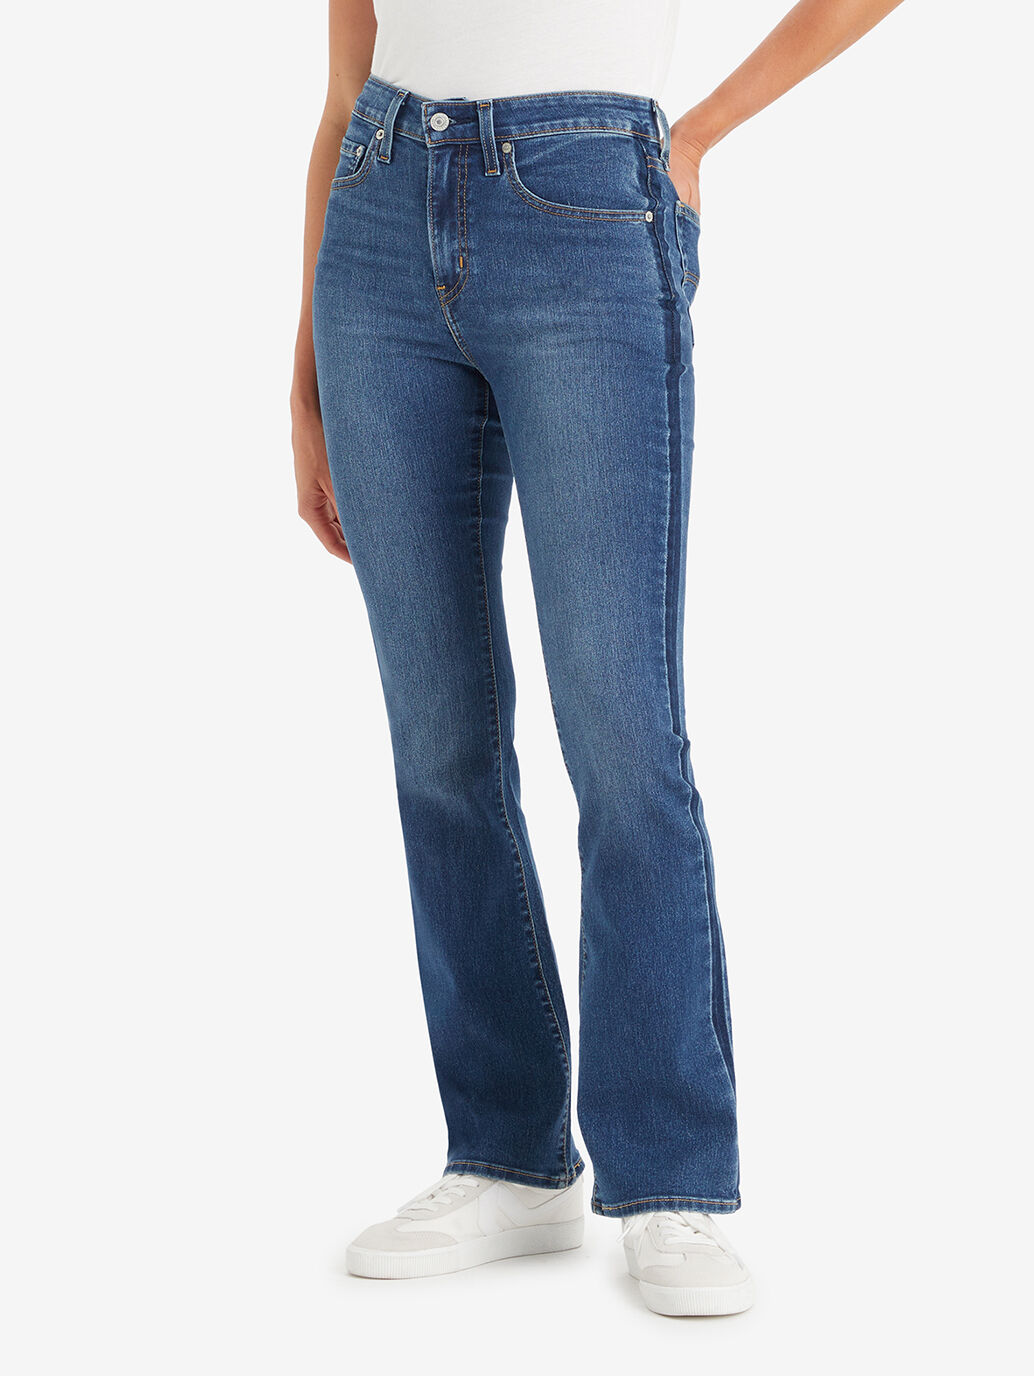 Levi’s® Women's 725 High-Rise Bootcut Jeans